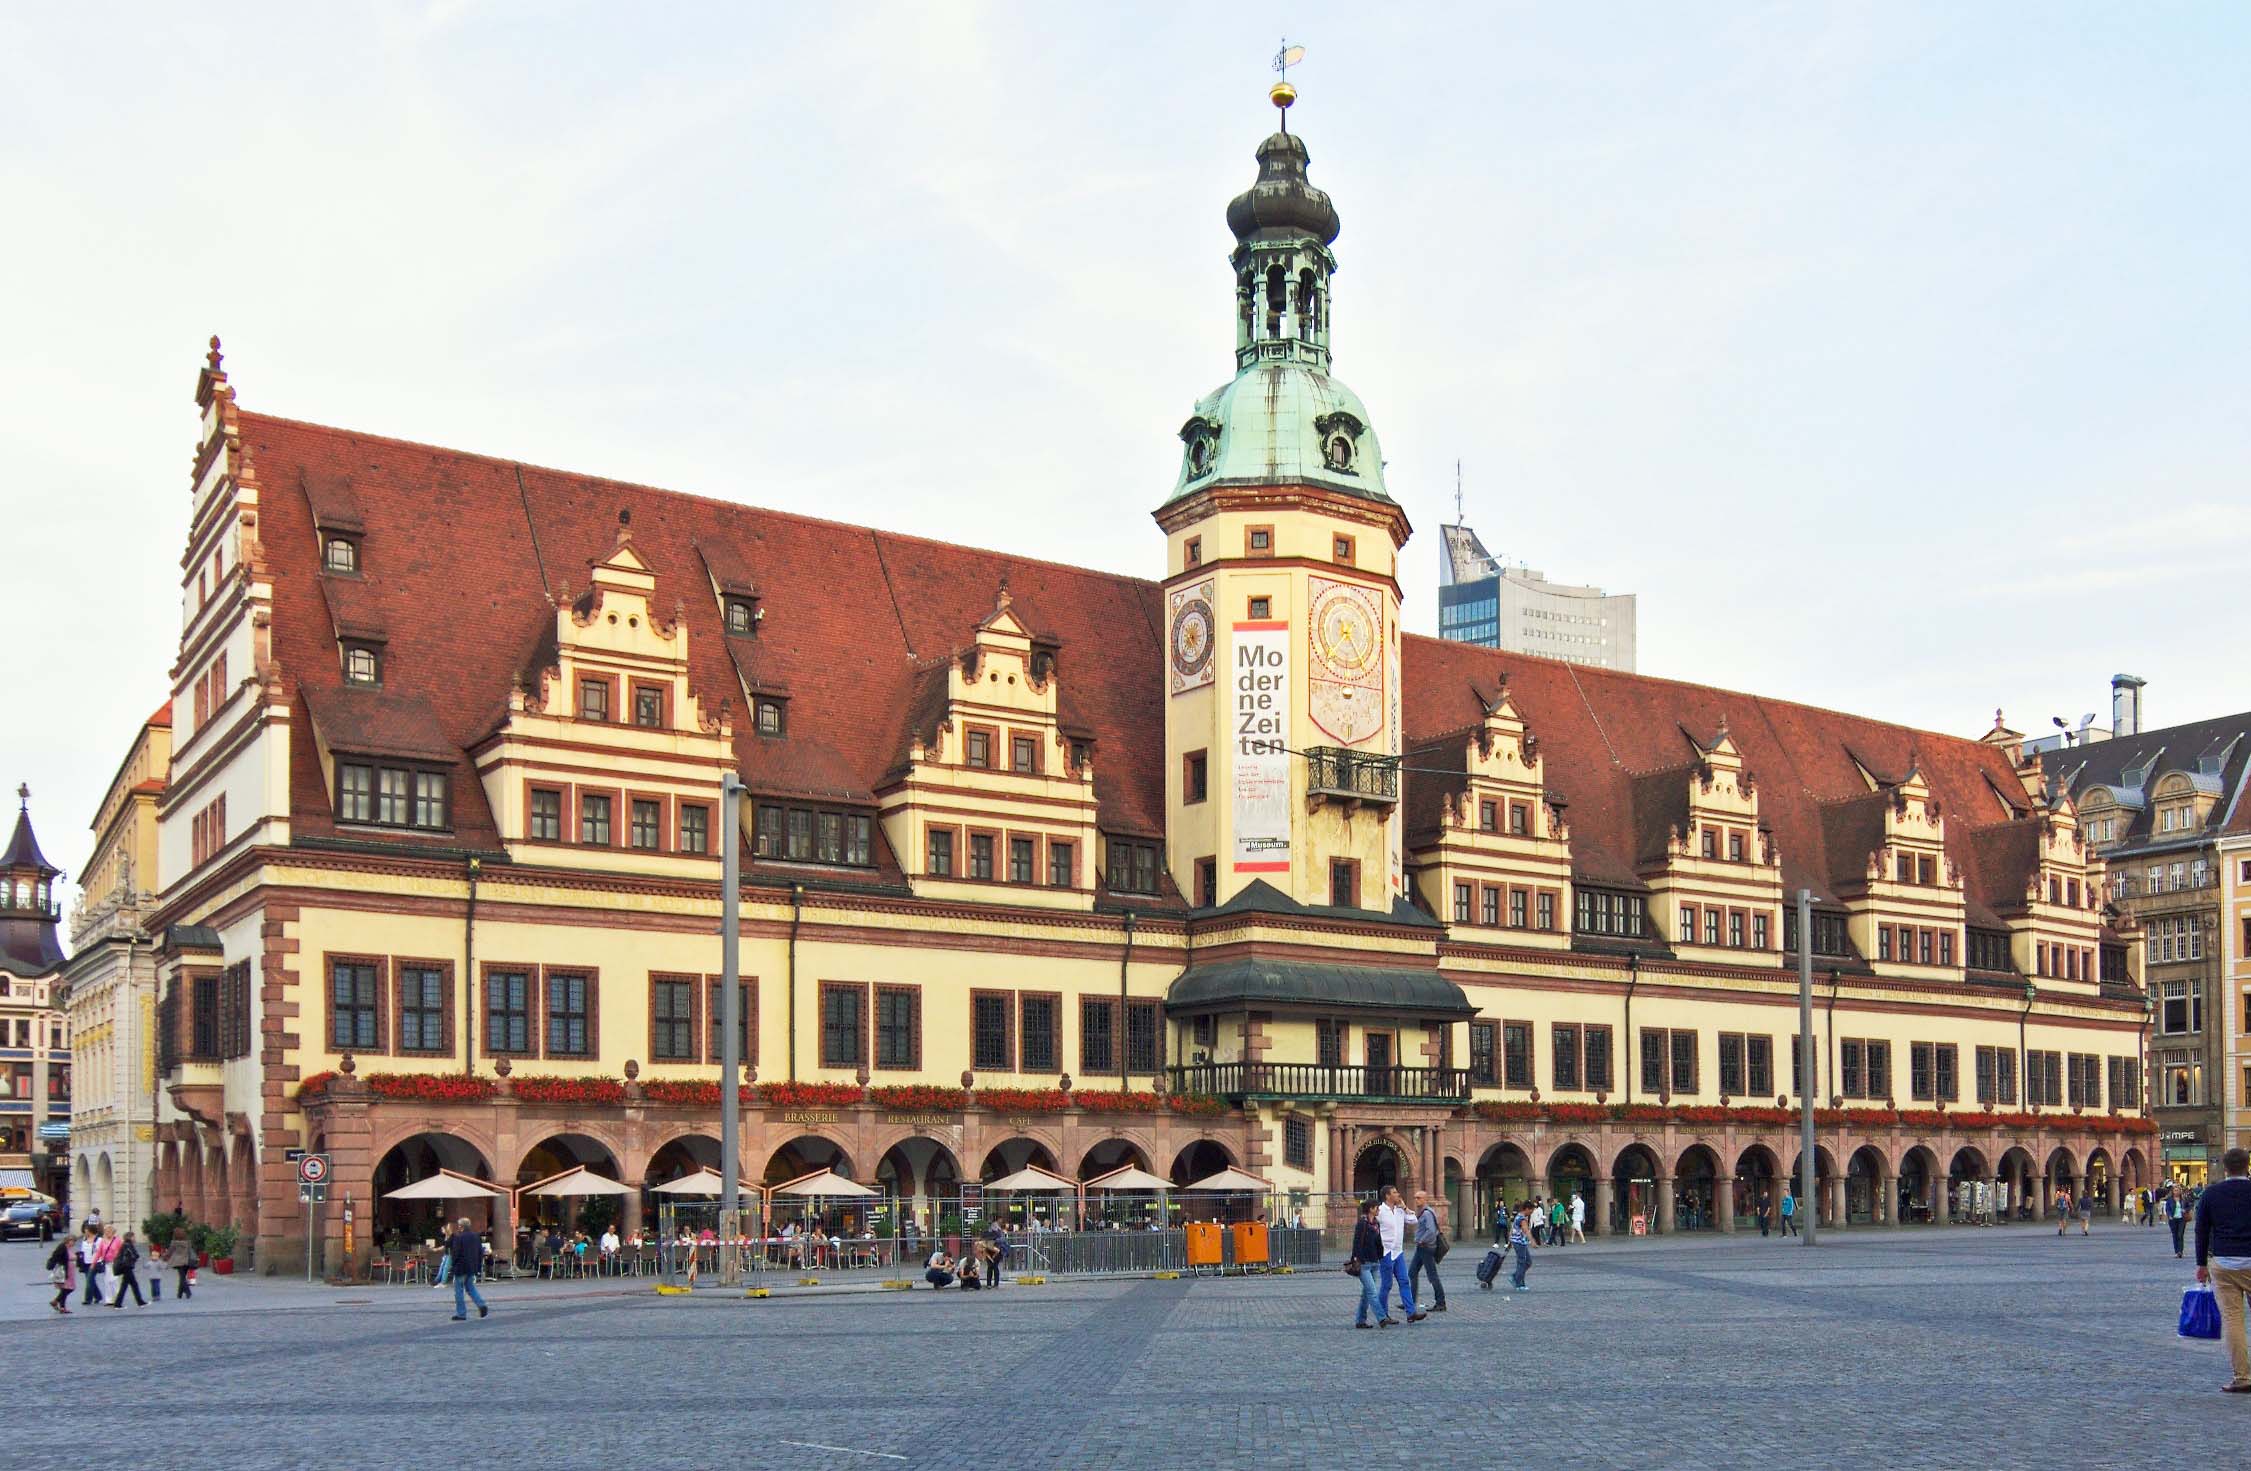 The Altes Rathaus (Old Town Hall) today, which houses the Museum of City History of Leipzig.